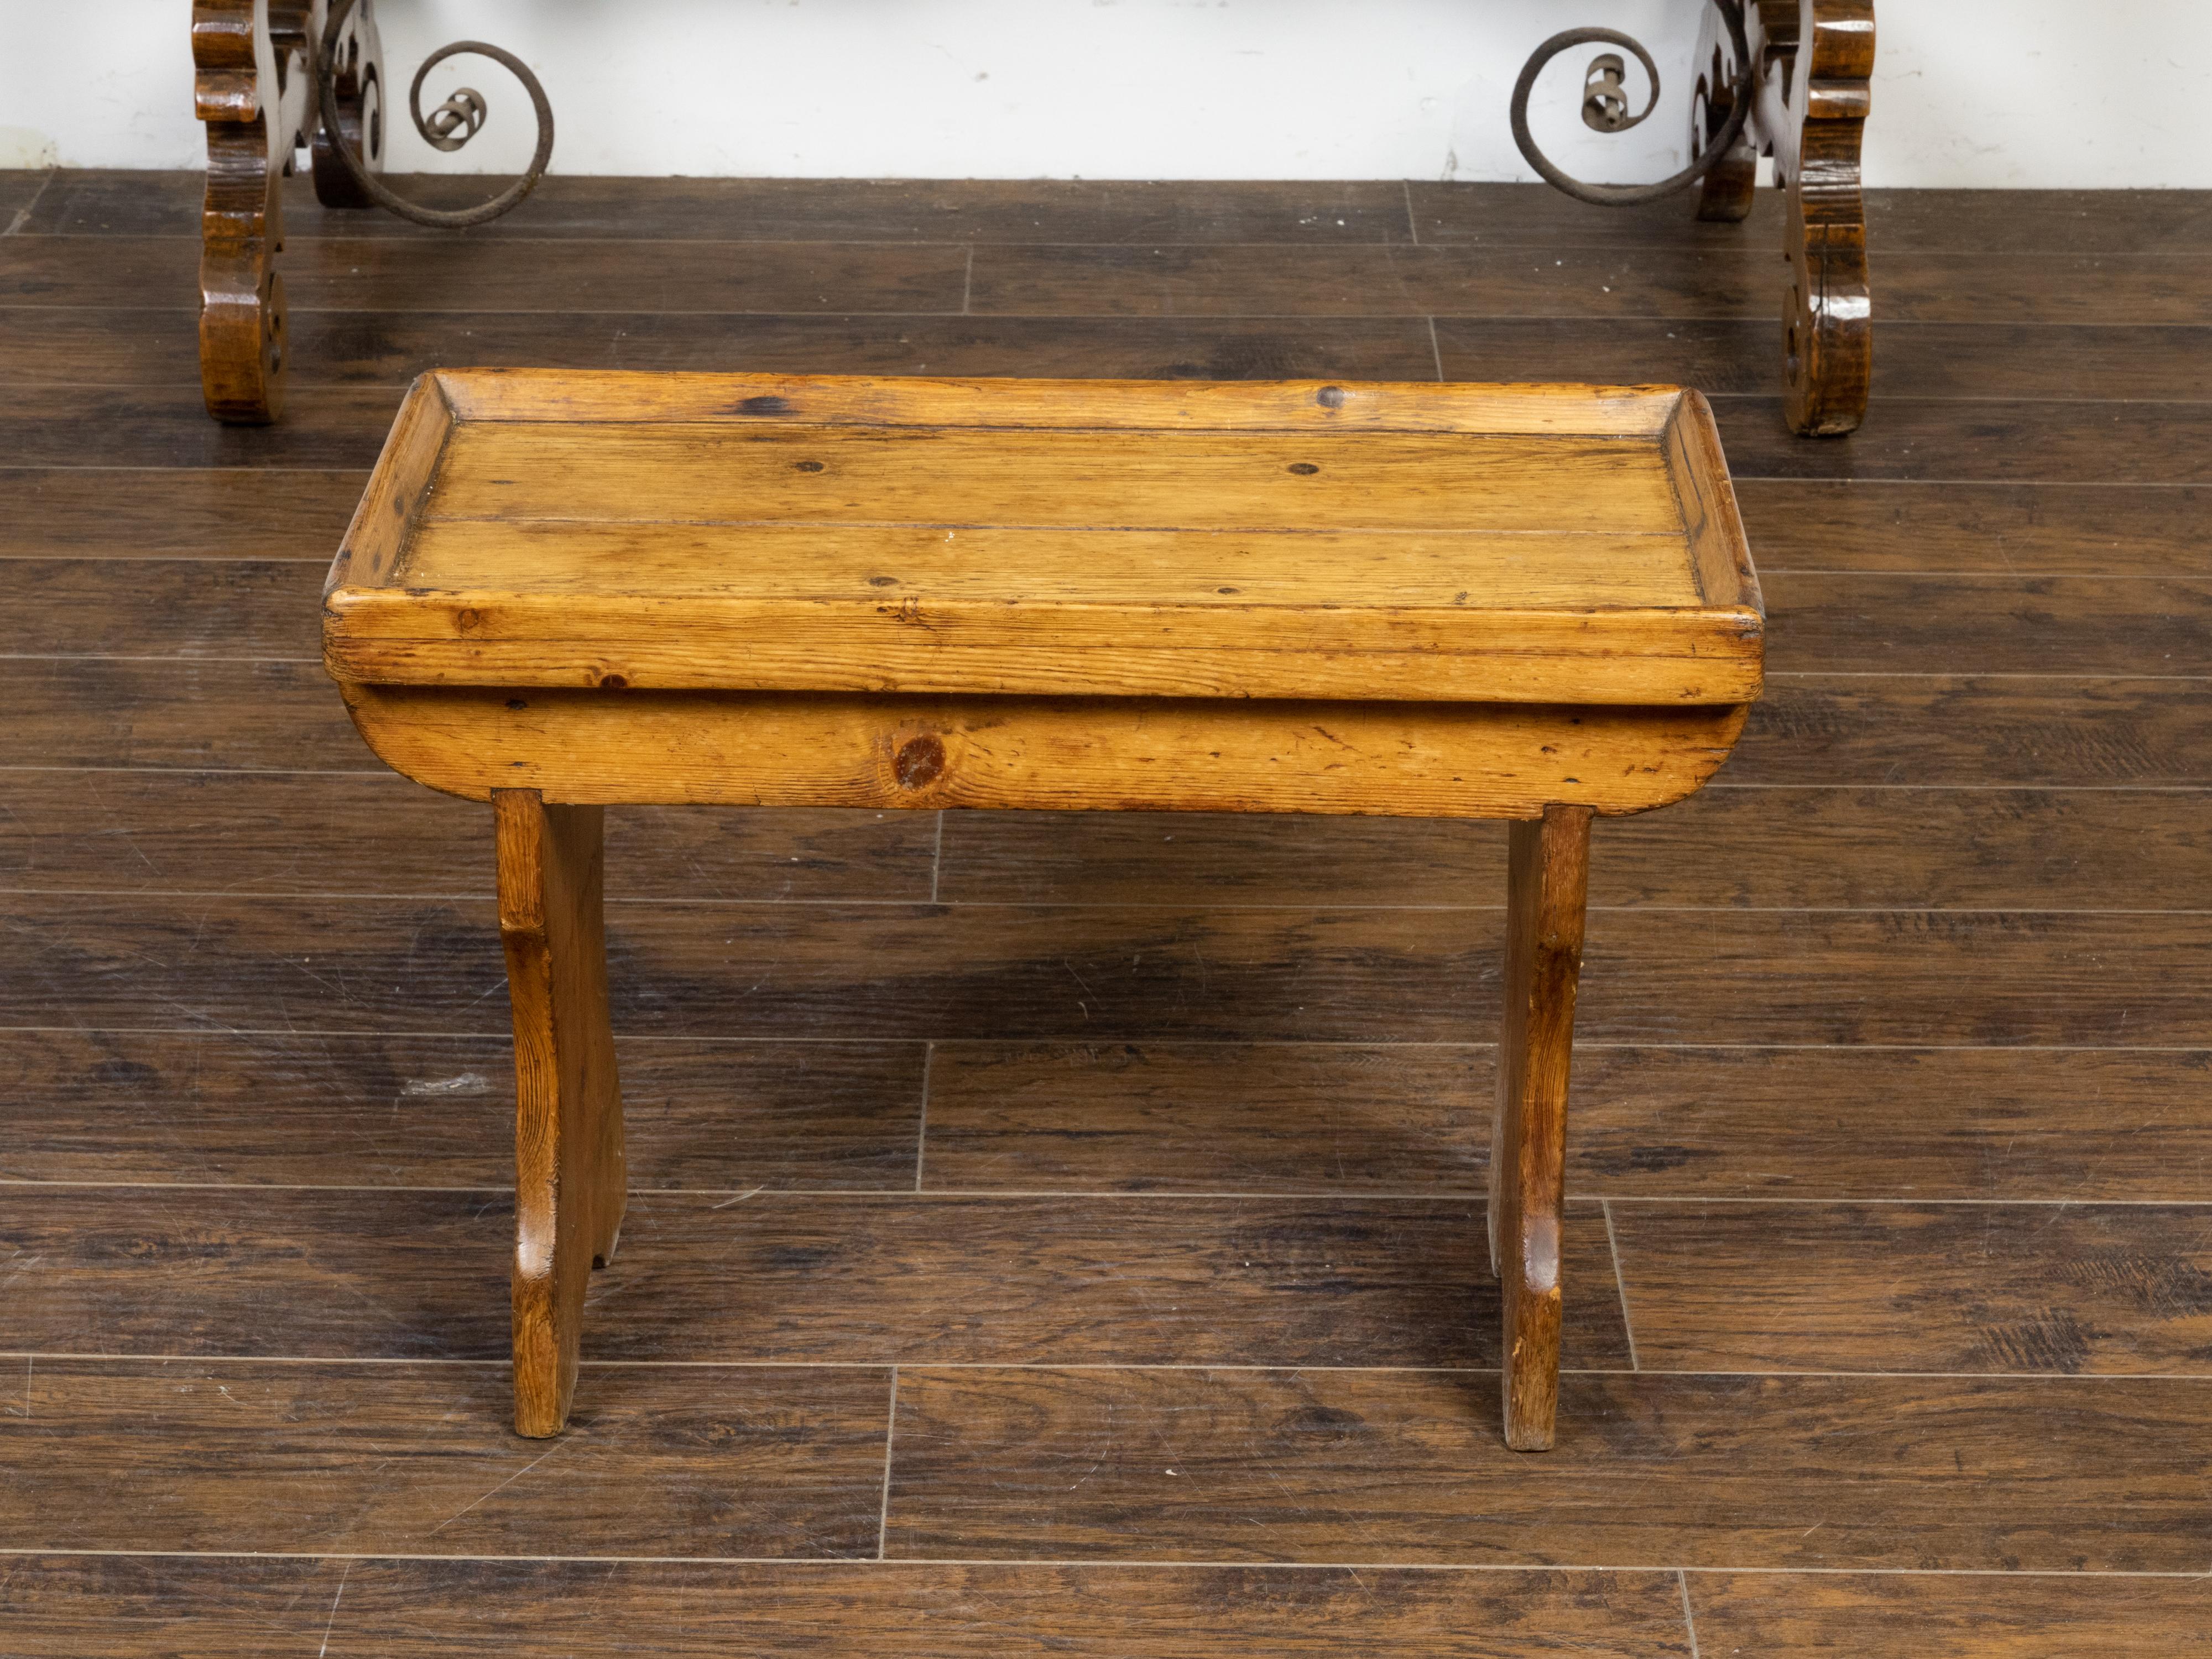 An English Turn of the Century pine drinks table from circa 1900 with small tray top, carved legs and nice rustic character. Immerse yourself in the charm and warmth of early 20th-century English design with this Turn of the Century pine drinks